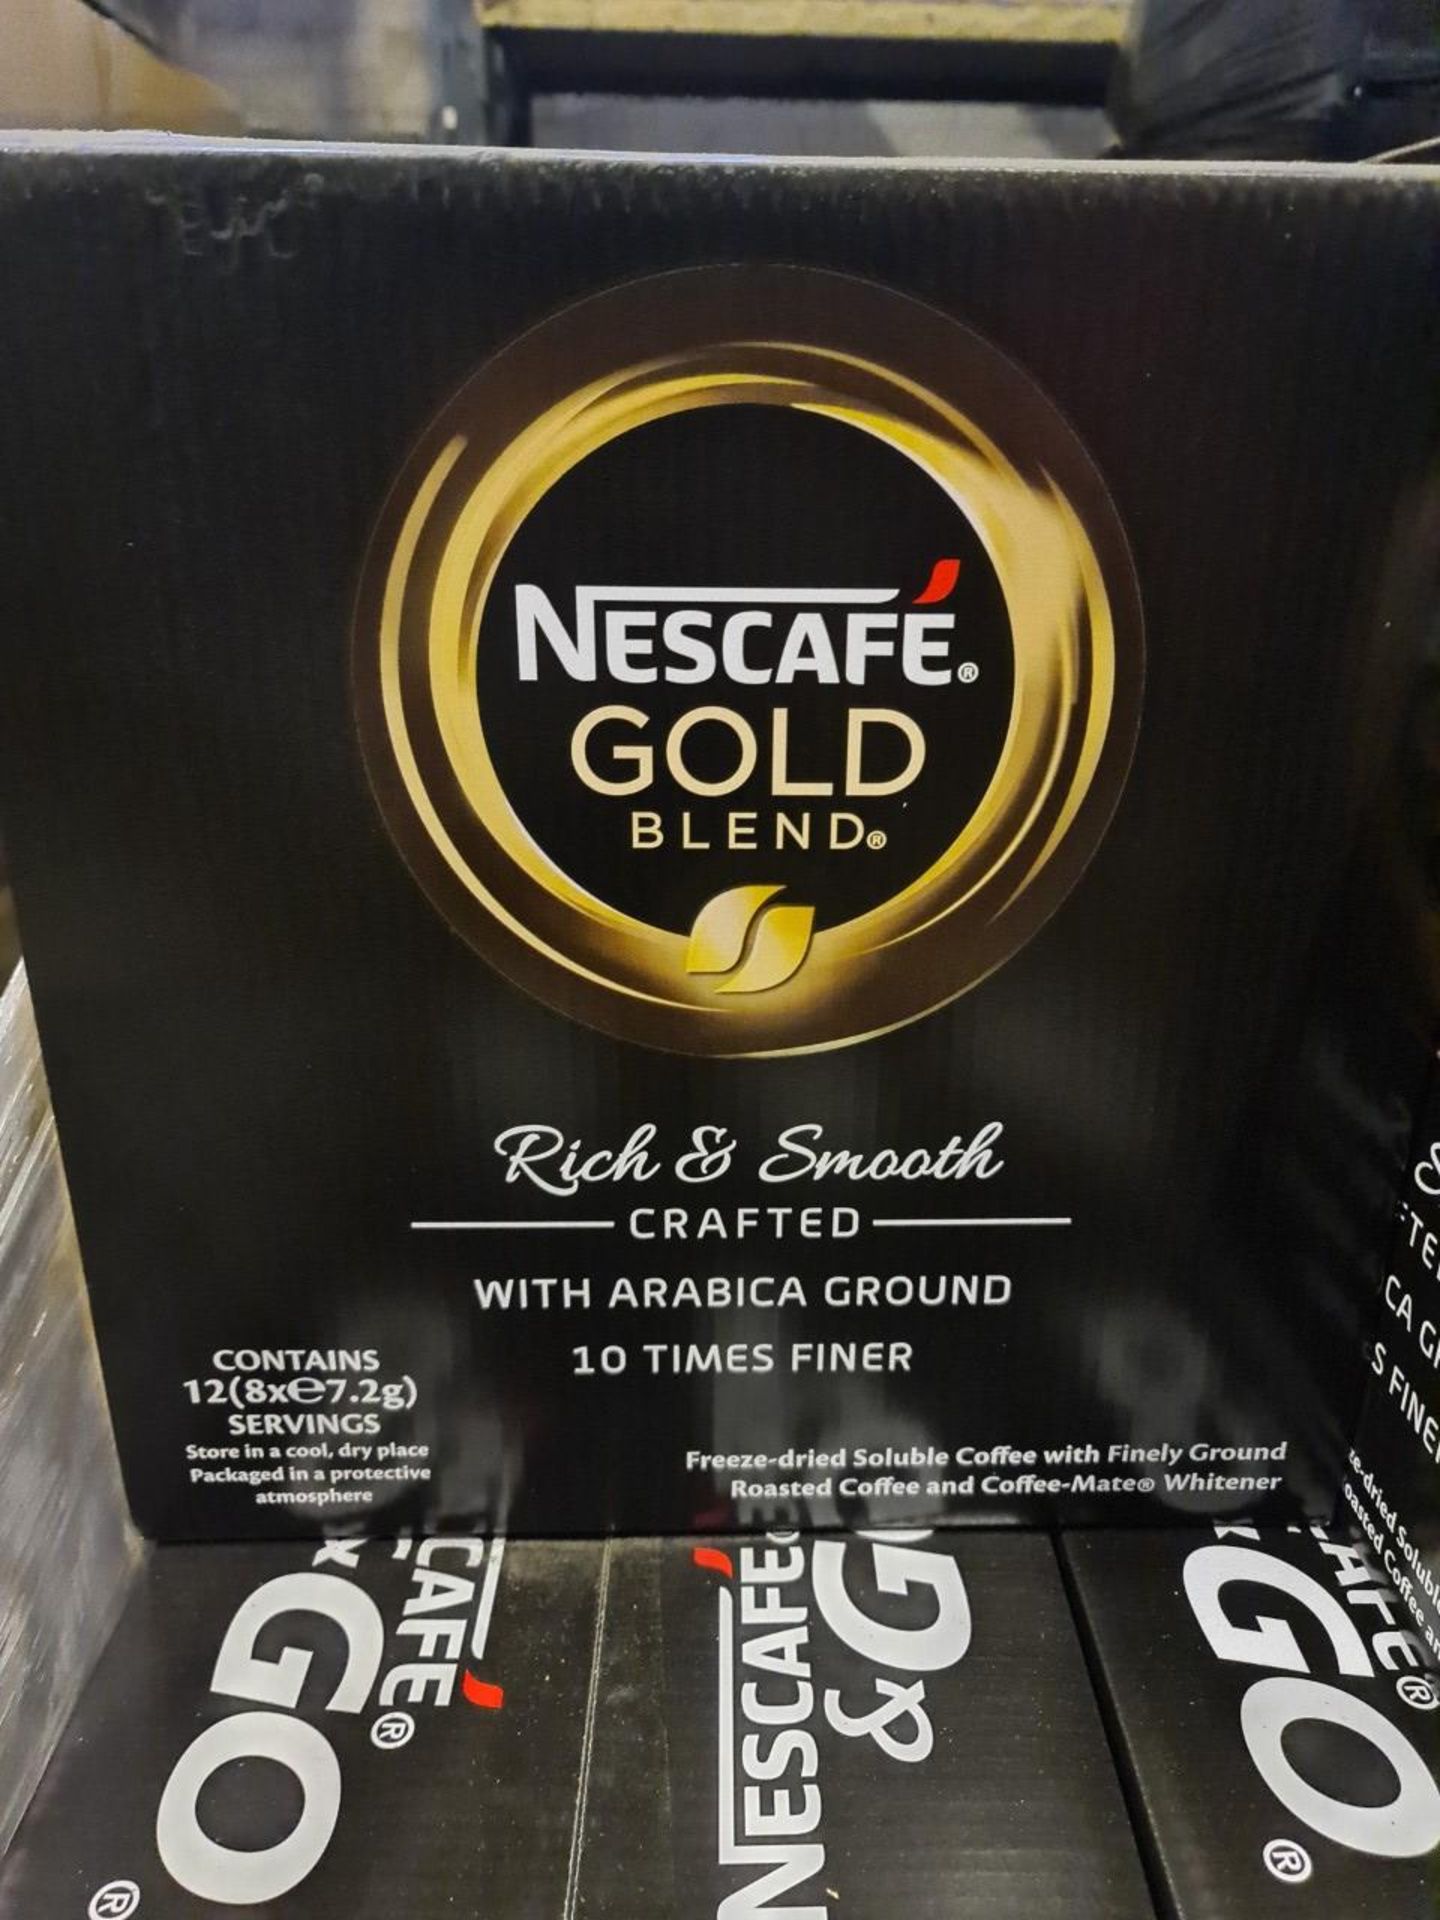 (S130) PALLET TO CONTAIN 27 BOXES EACH CONTAINING 12 PACKS OF 8 NESCAFE GOLD BLEND (324 PACKS IN - Image 2 of 2